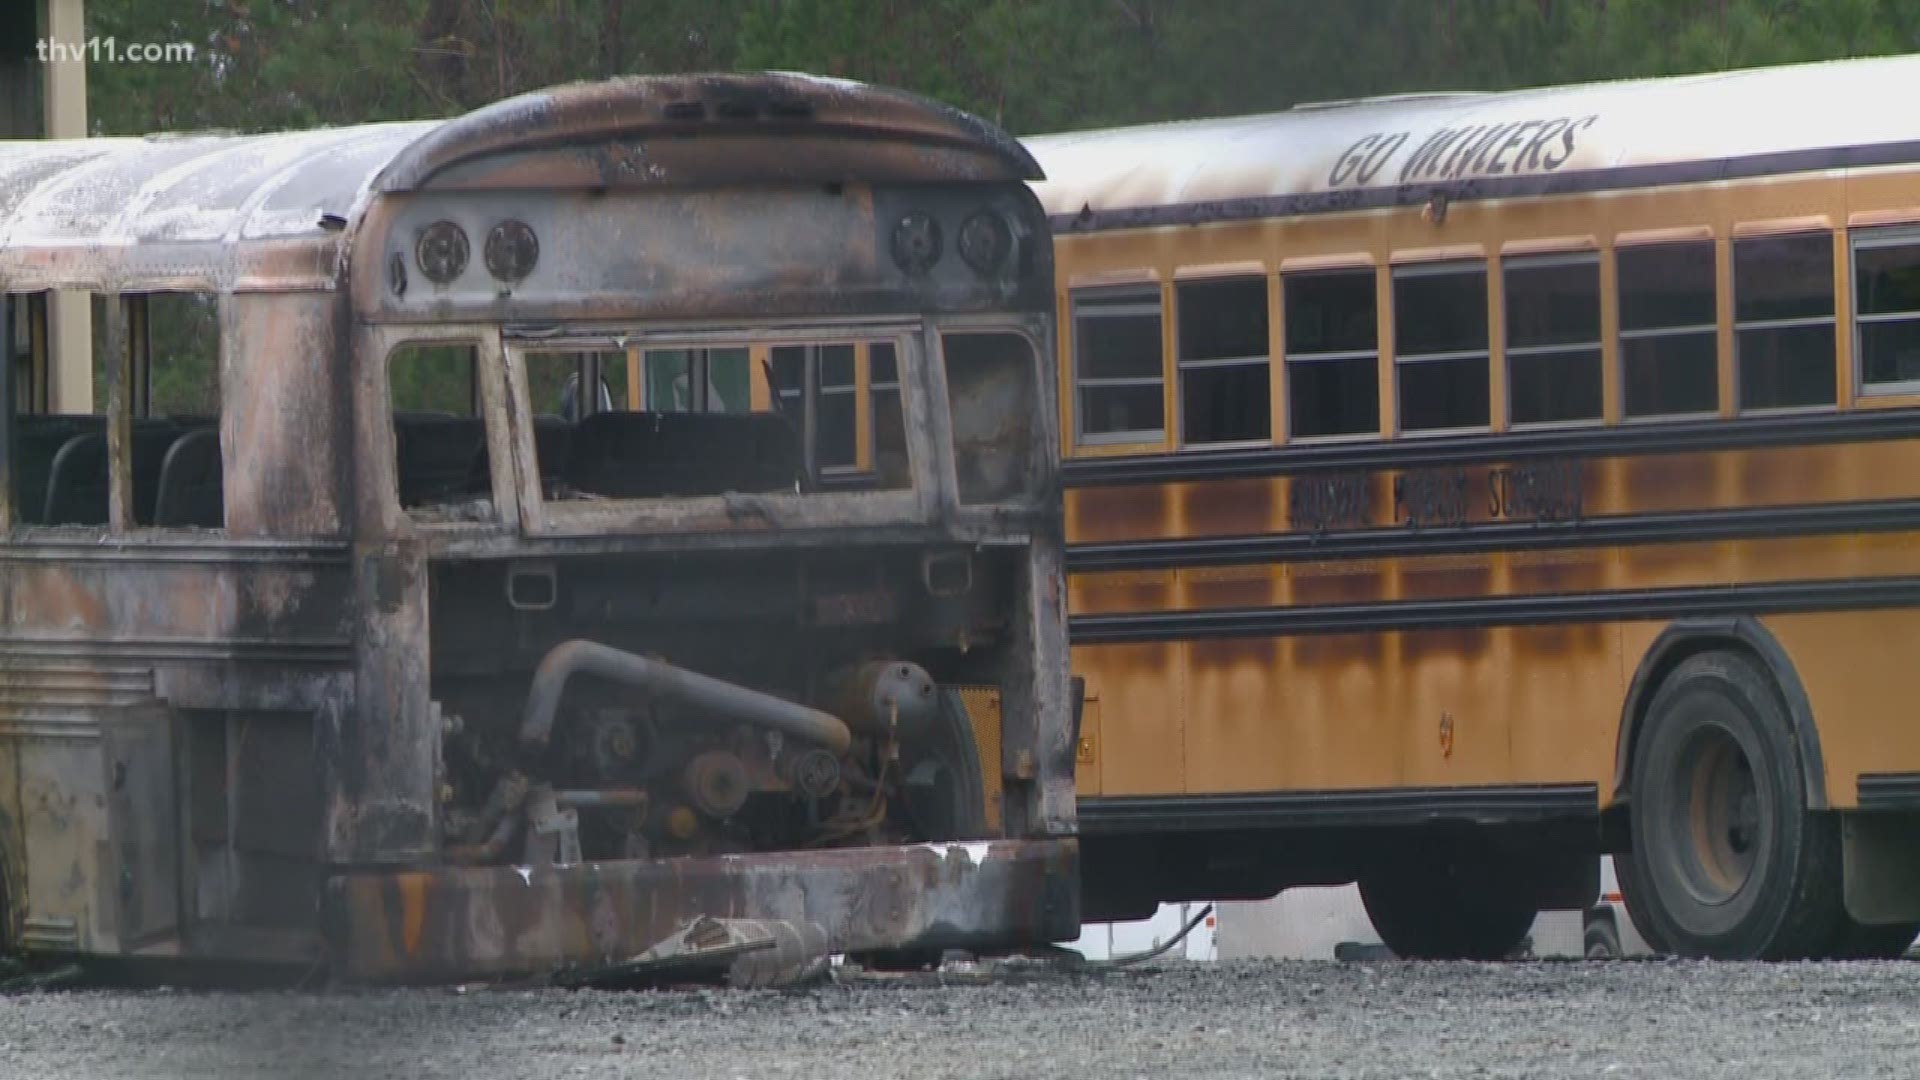 Some Saline County kids won't ride their normal bus to school tomorrow, and an early morning fire is to blame.